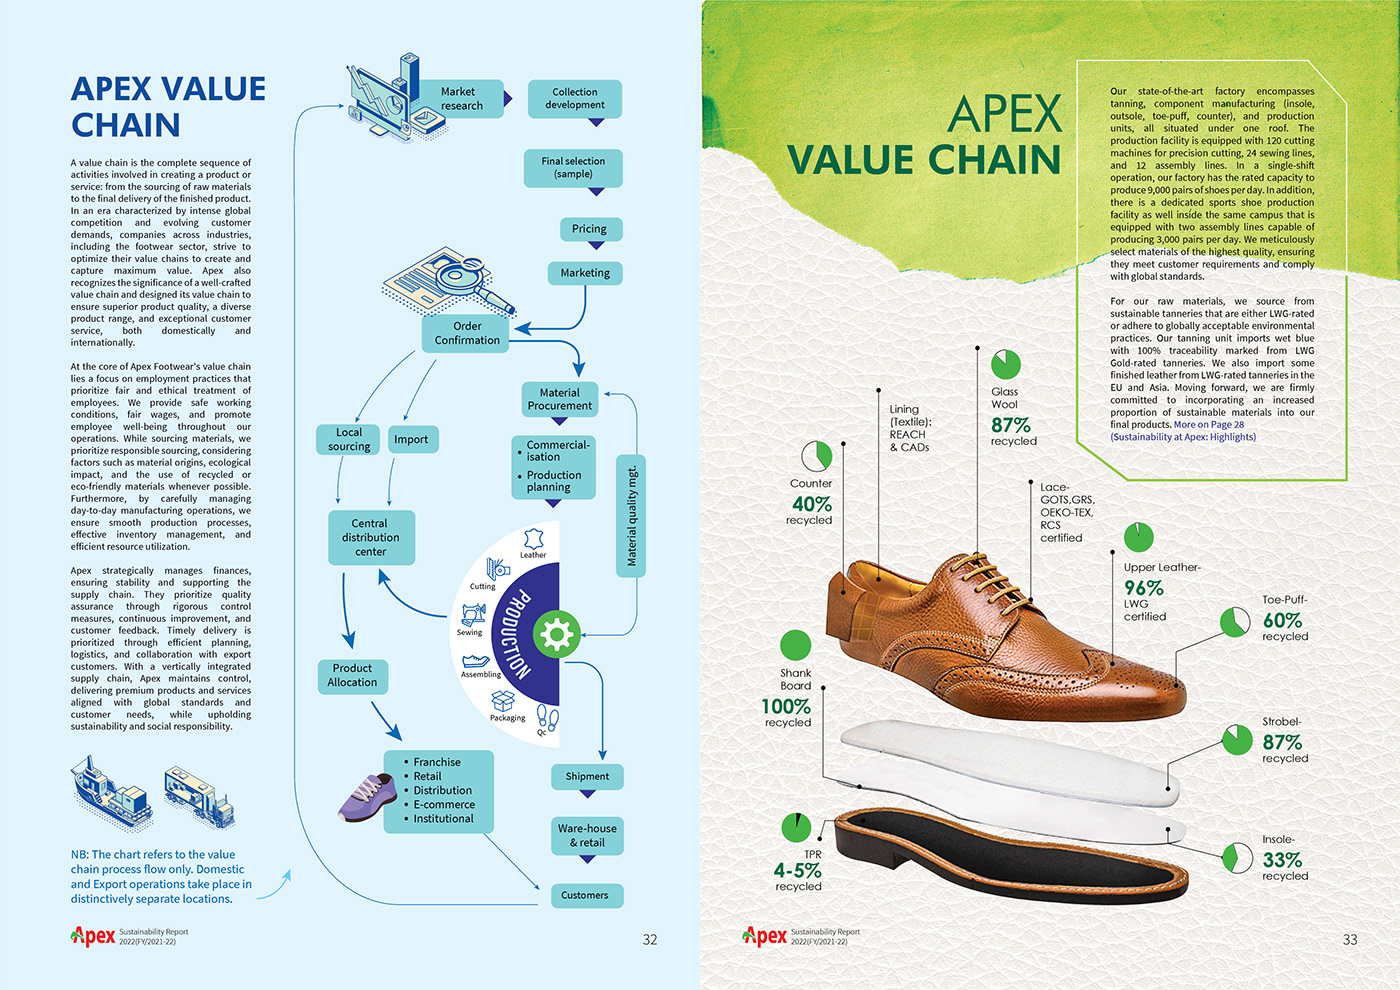 Apex Sustainability report SDG footwear sprint bata shoes Hush Puppies Nike Shoes